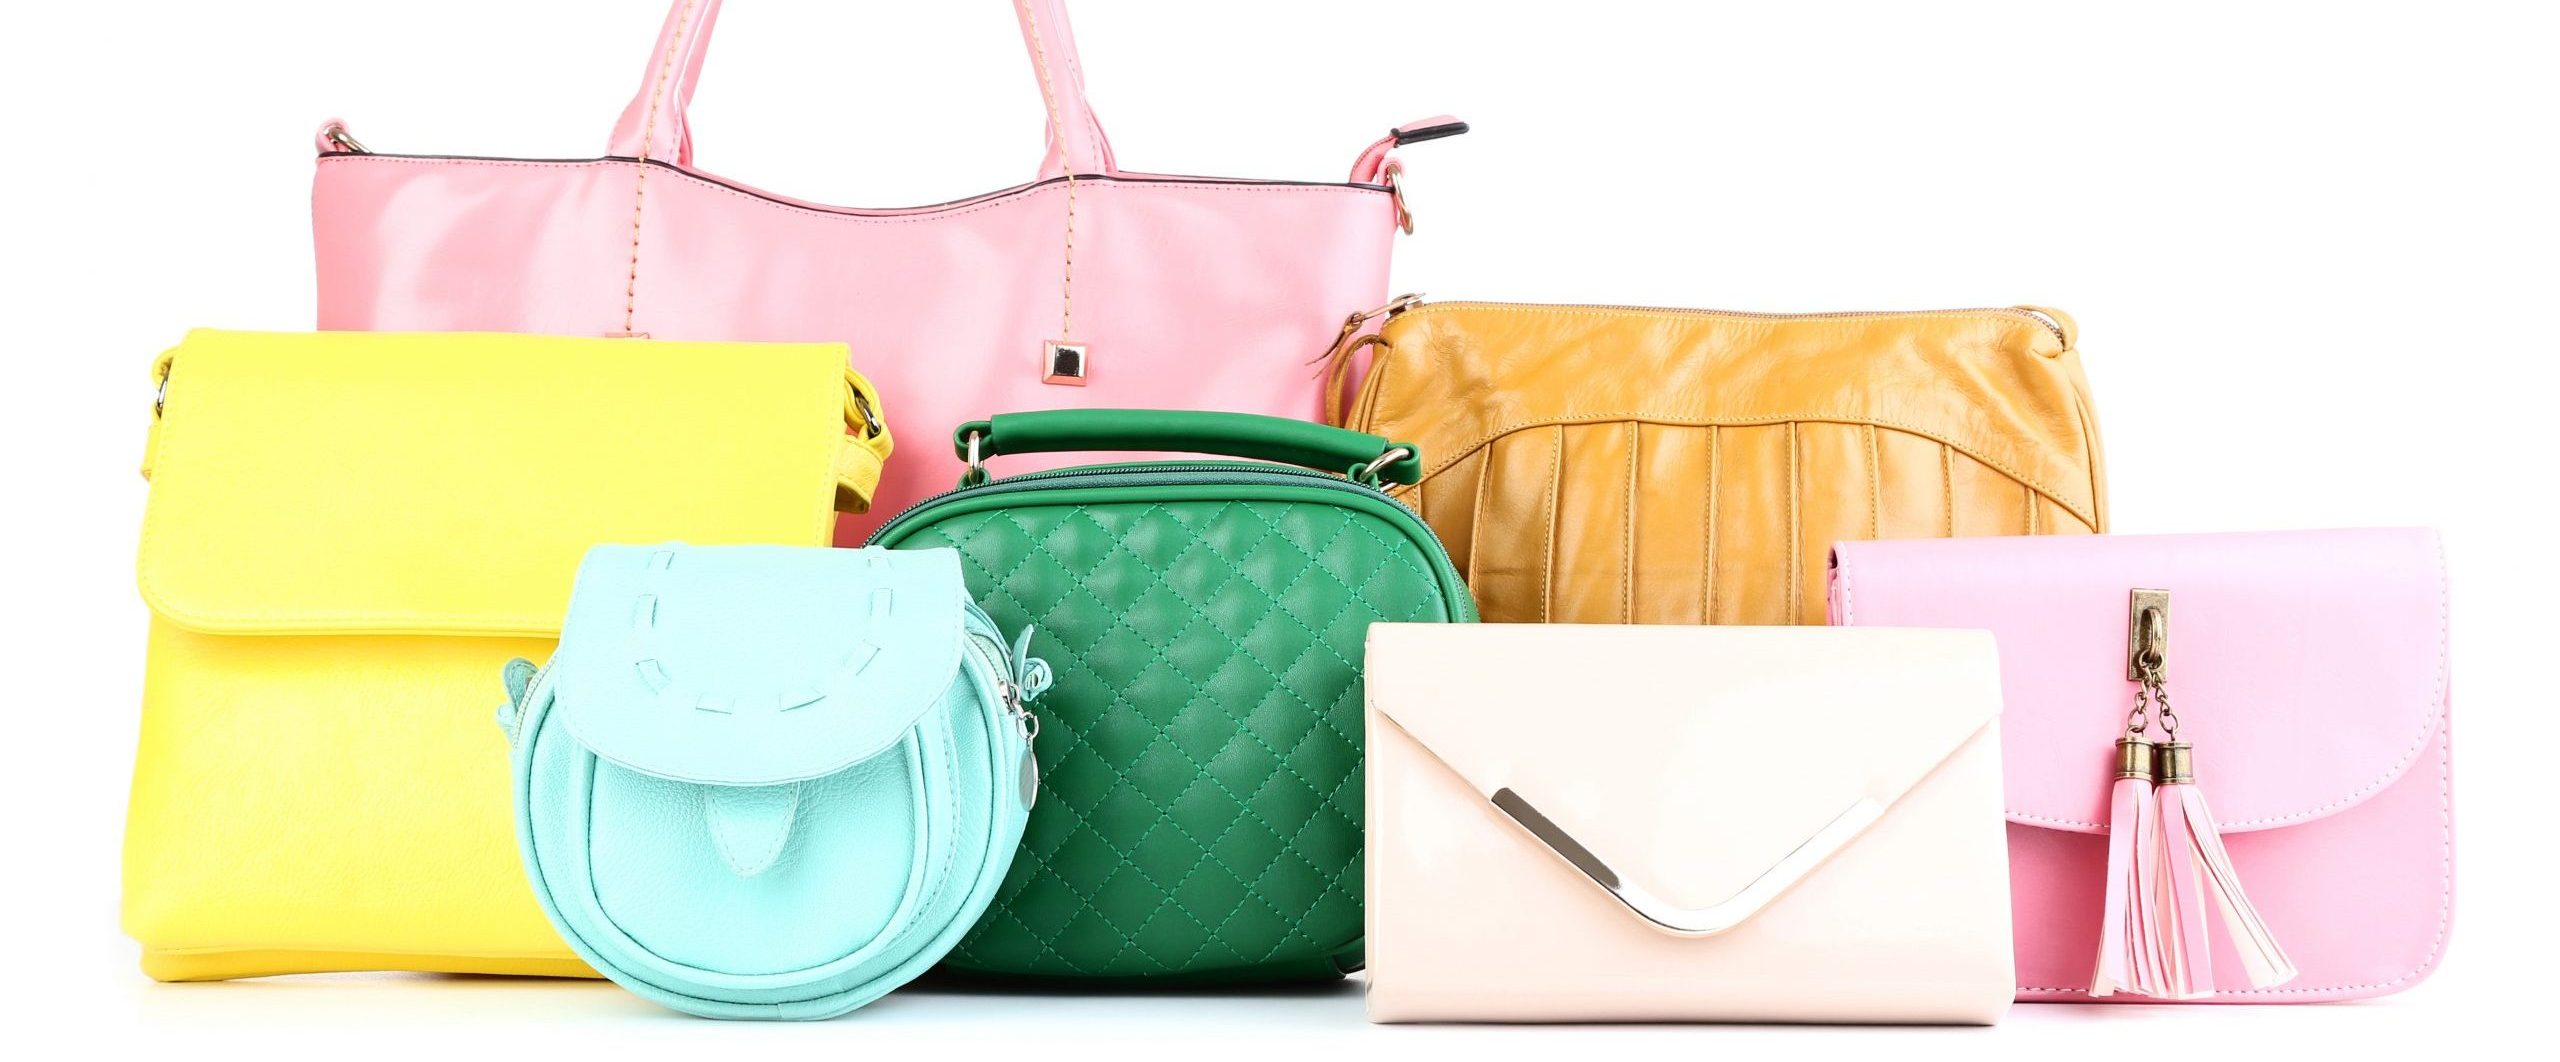 6 Most Affordable Hermès Handbags As Of 2023 - Journey To France